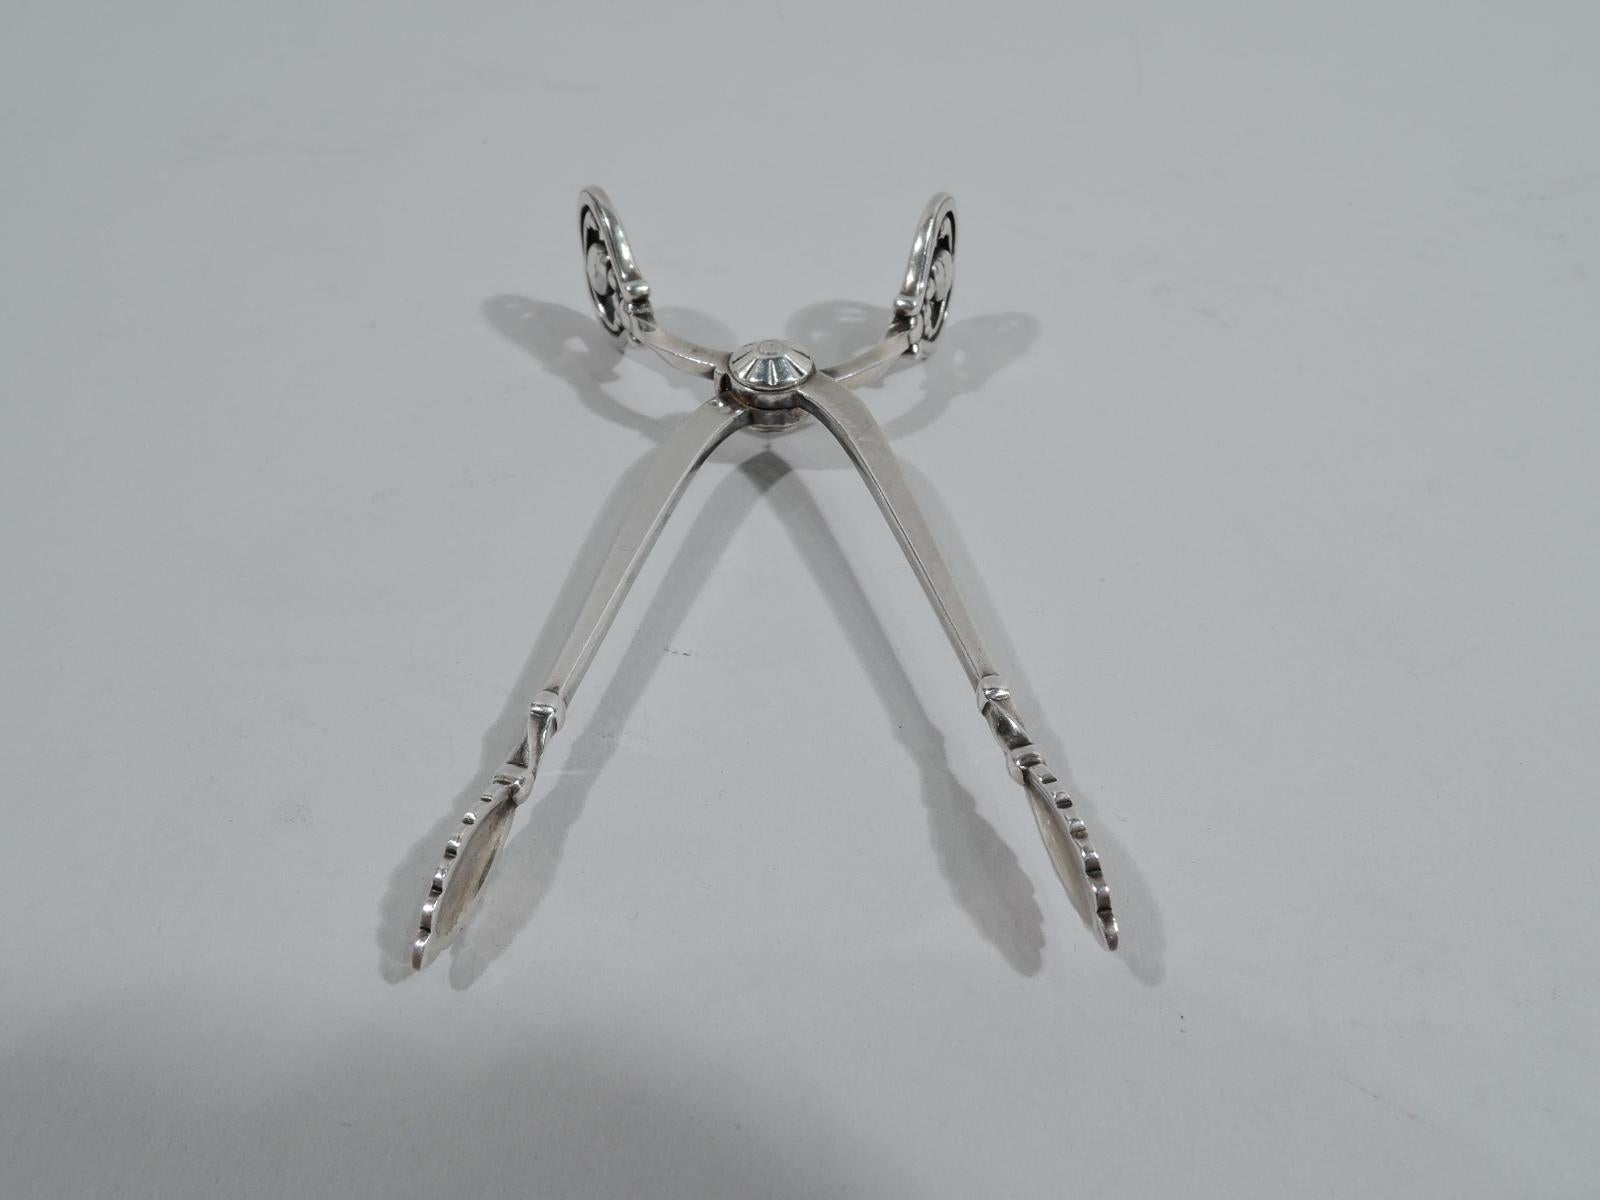 Blossom sterling silver sugar nips. Made by Georg Jensen in Copenhagen. Serrated leaf jaws and open terminals inset with seed-spilling pods. A great piece in the classic pattern. Fully marked with postwar maker's stamp.